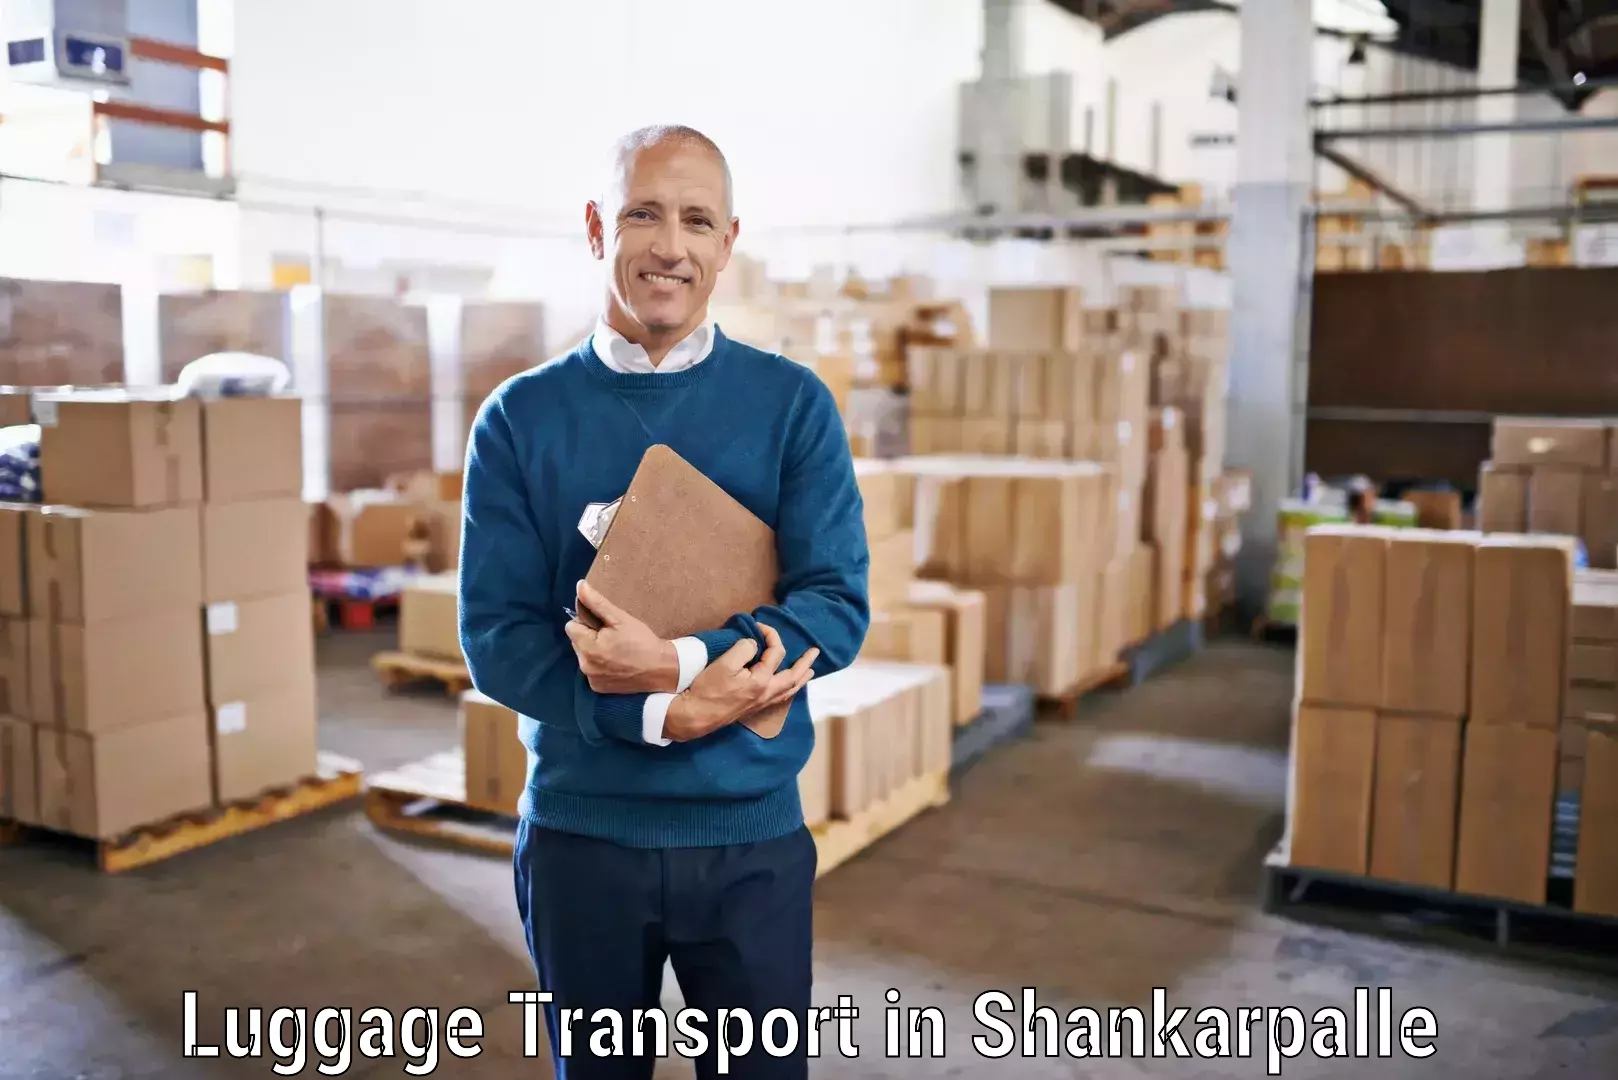 Luggage delivery app in Shankarpalle